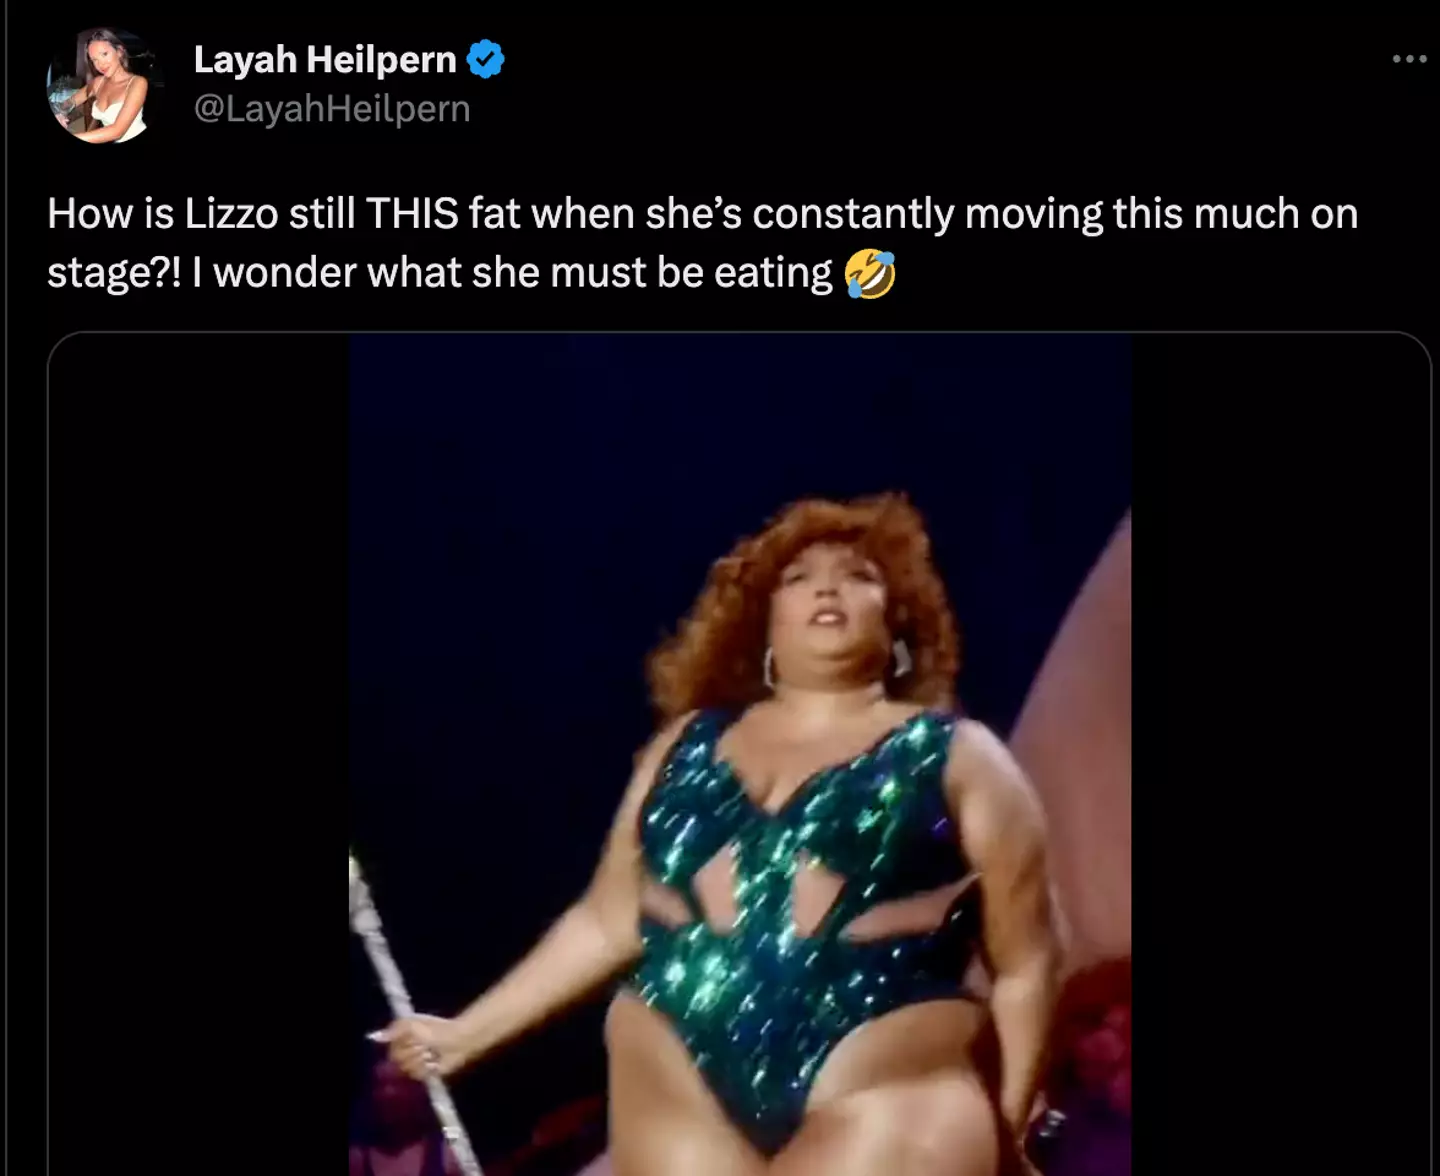 Lizzo faces trolling on Twitter in relation to her body image on a daily basis.